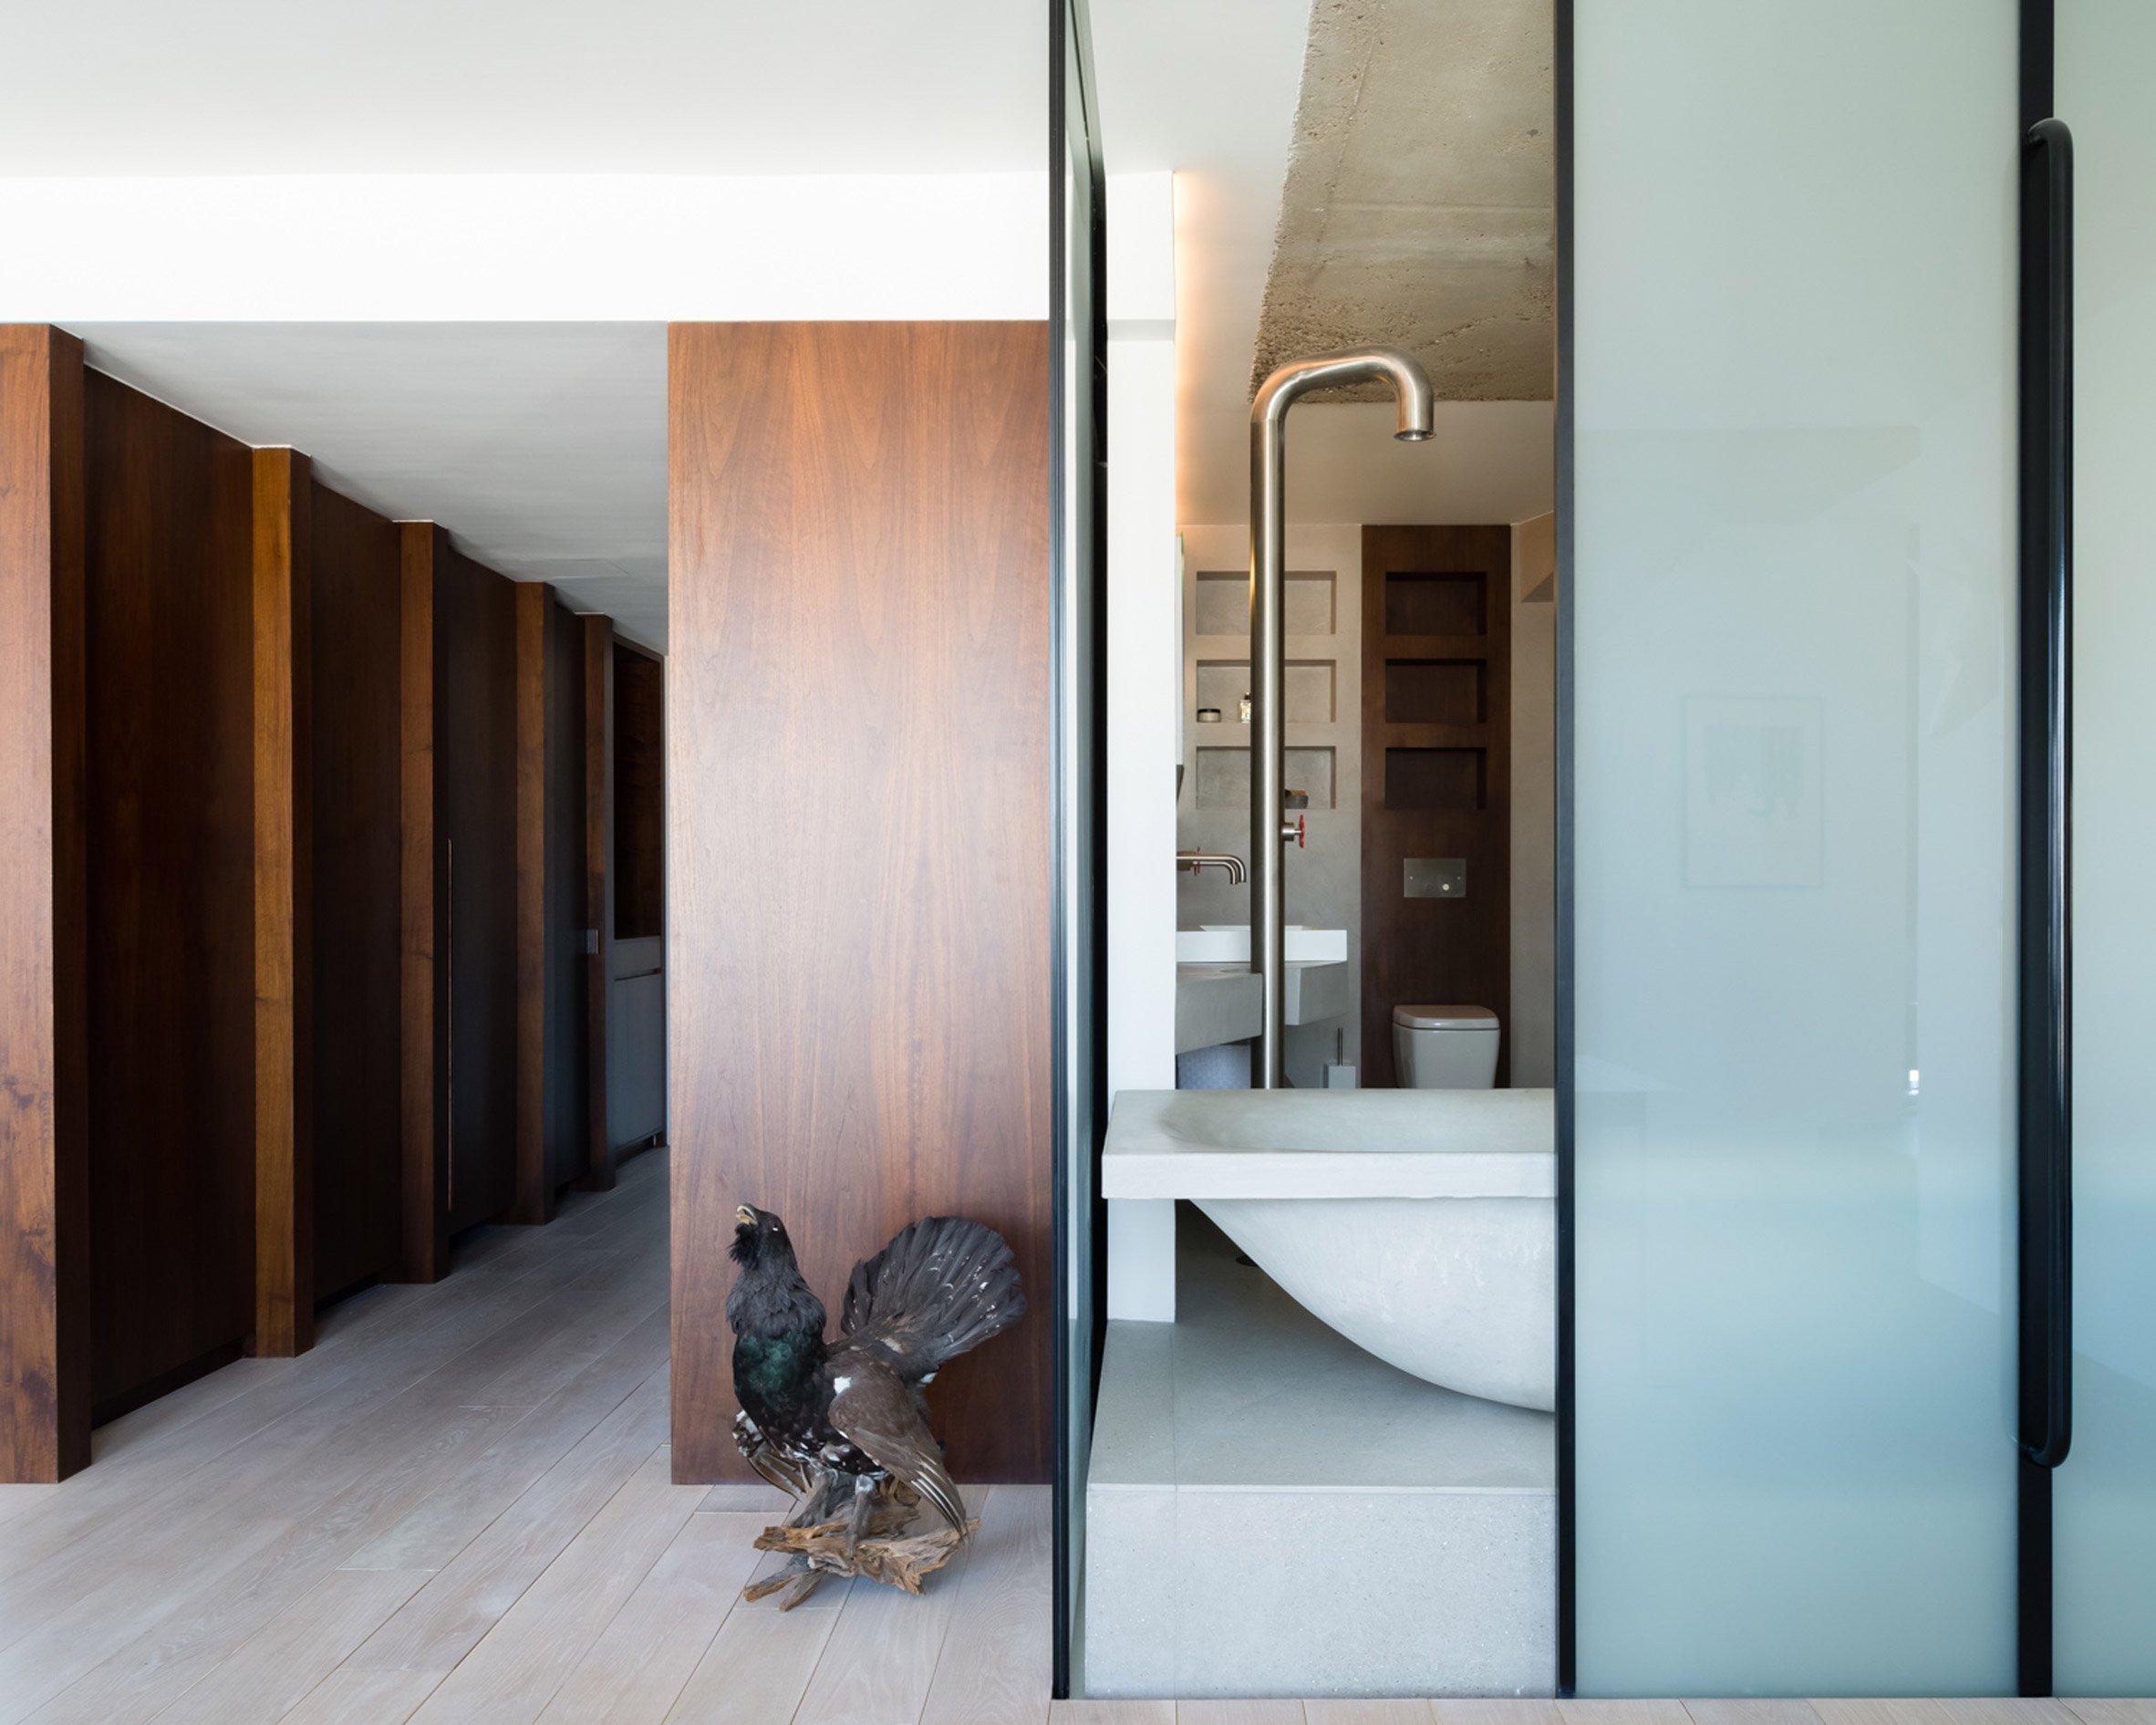 This flat in Londo is centered around a concrete bathtub, which is placed in the center